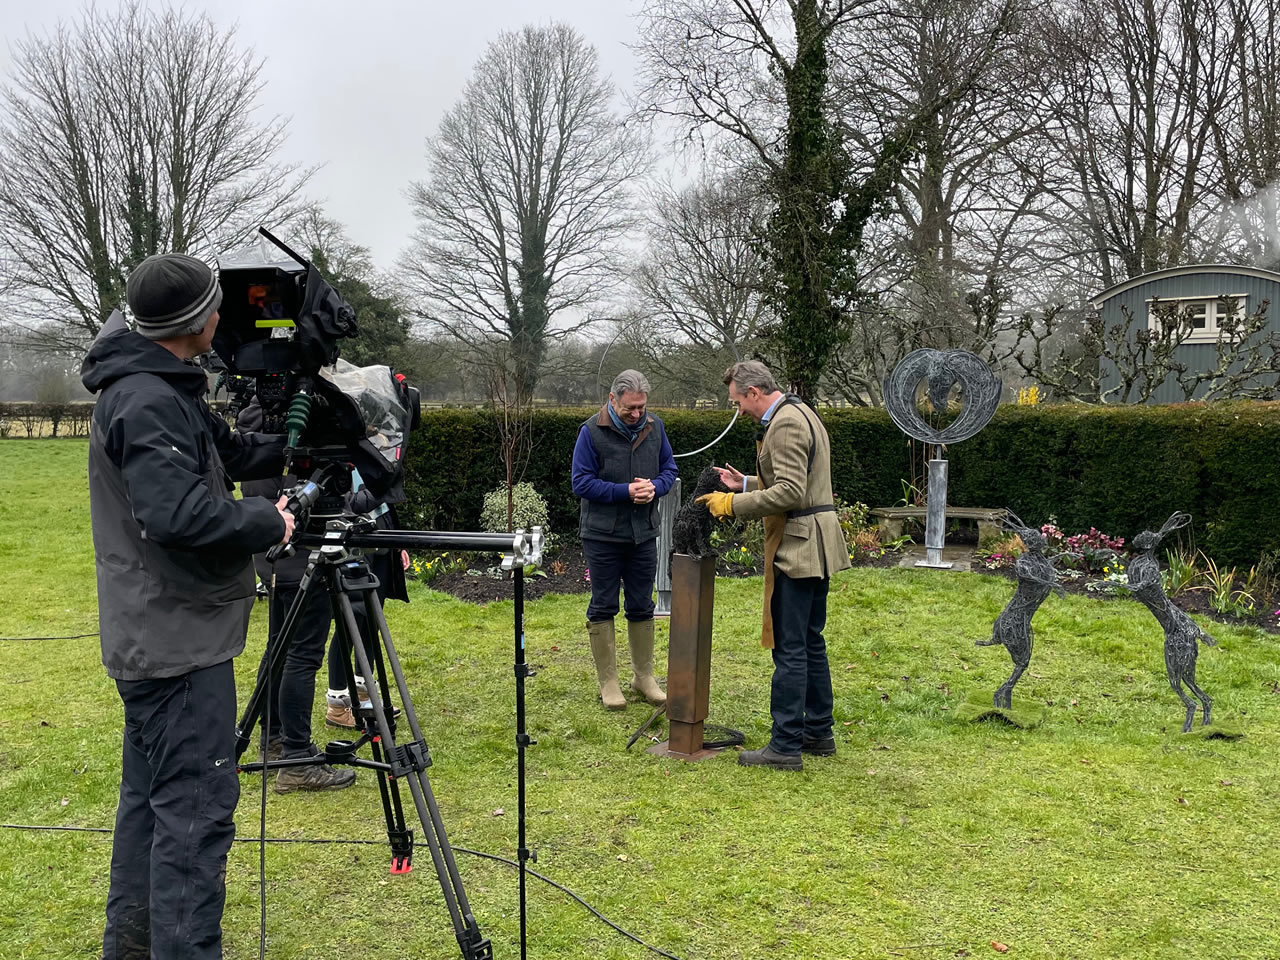 So braving the elements on a very cold and wet February day in Hampshire, I am filming with �Love your Weekend� with Alan Titchmarsh. Giving a masterclass to Alan!